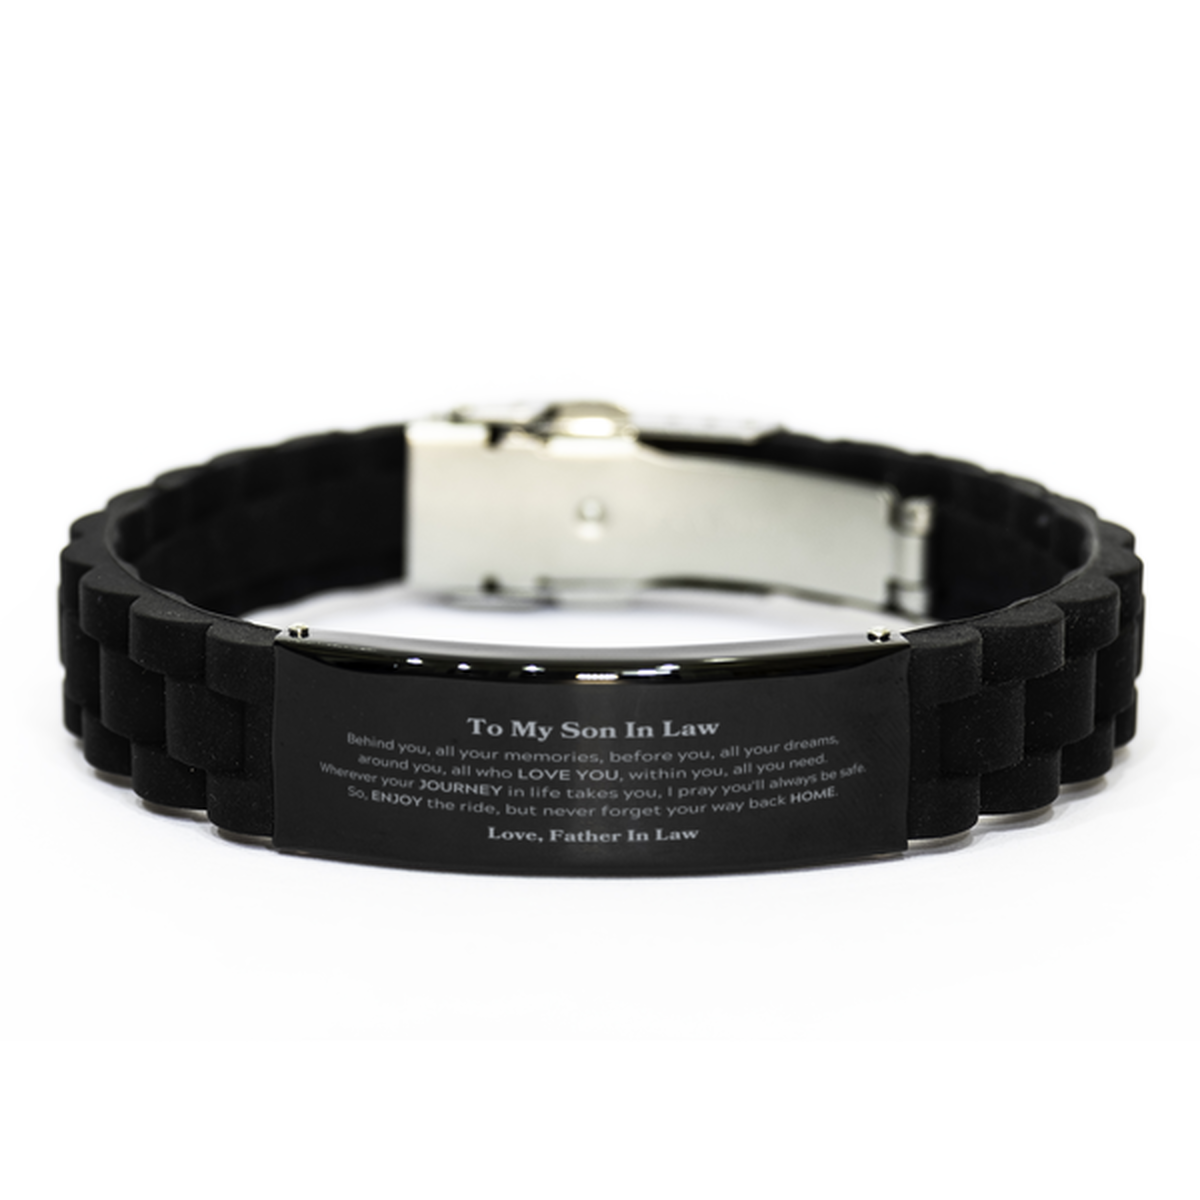 To My Son In Law Graduation Gifts from Father In Law, Son In Law Black Glidelock Clasp Bracelet Christmas Birthday Gifts for Son In Law Behind you, all your memories, before you, all your dreams. Love, Father In Law